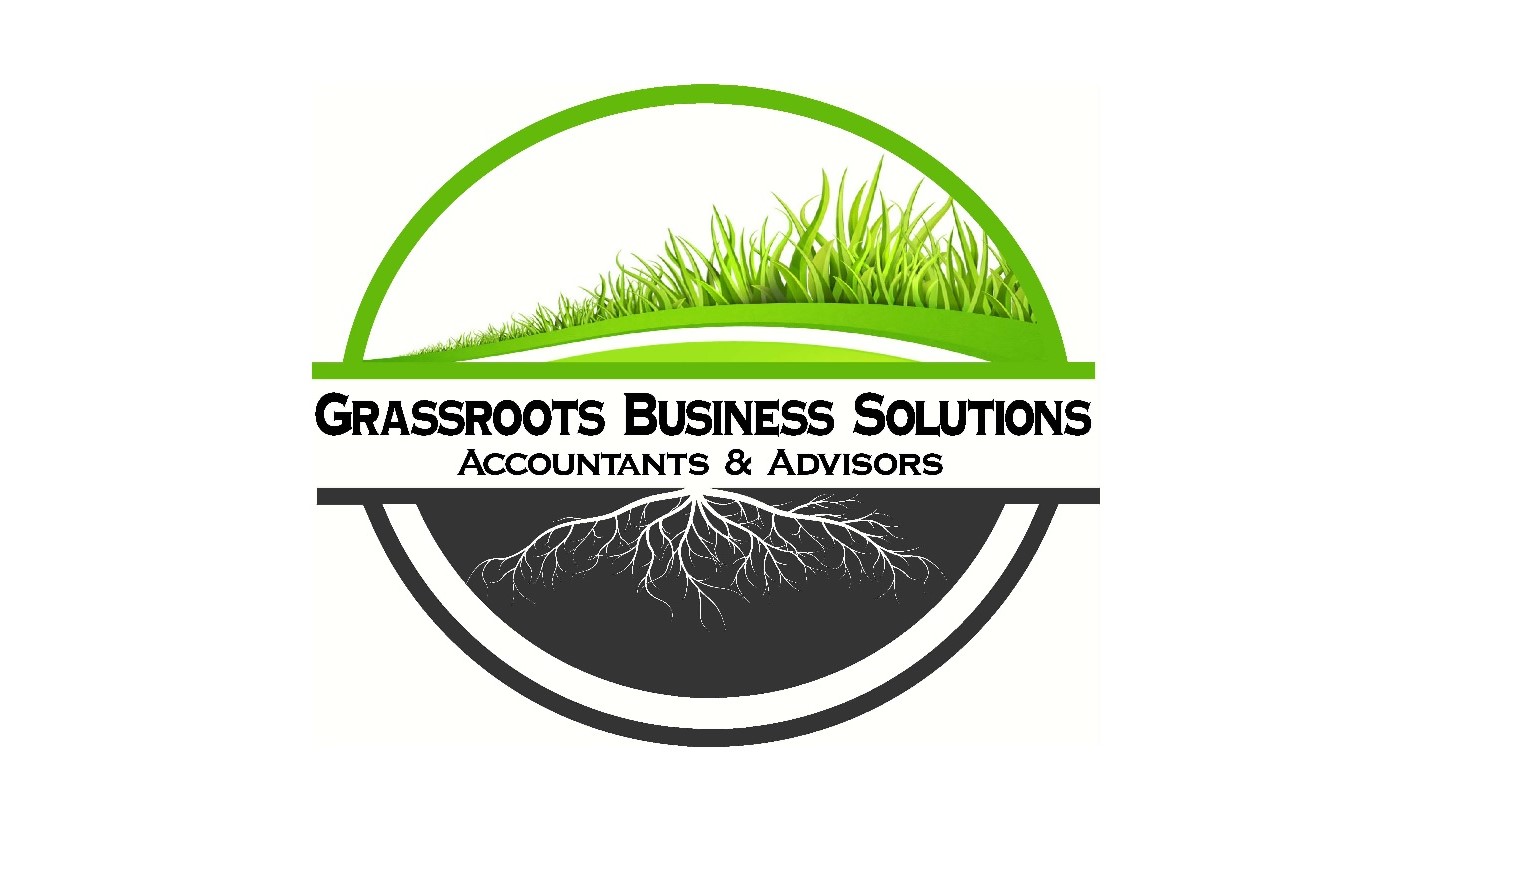 Grassroots Business Solutions